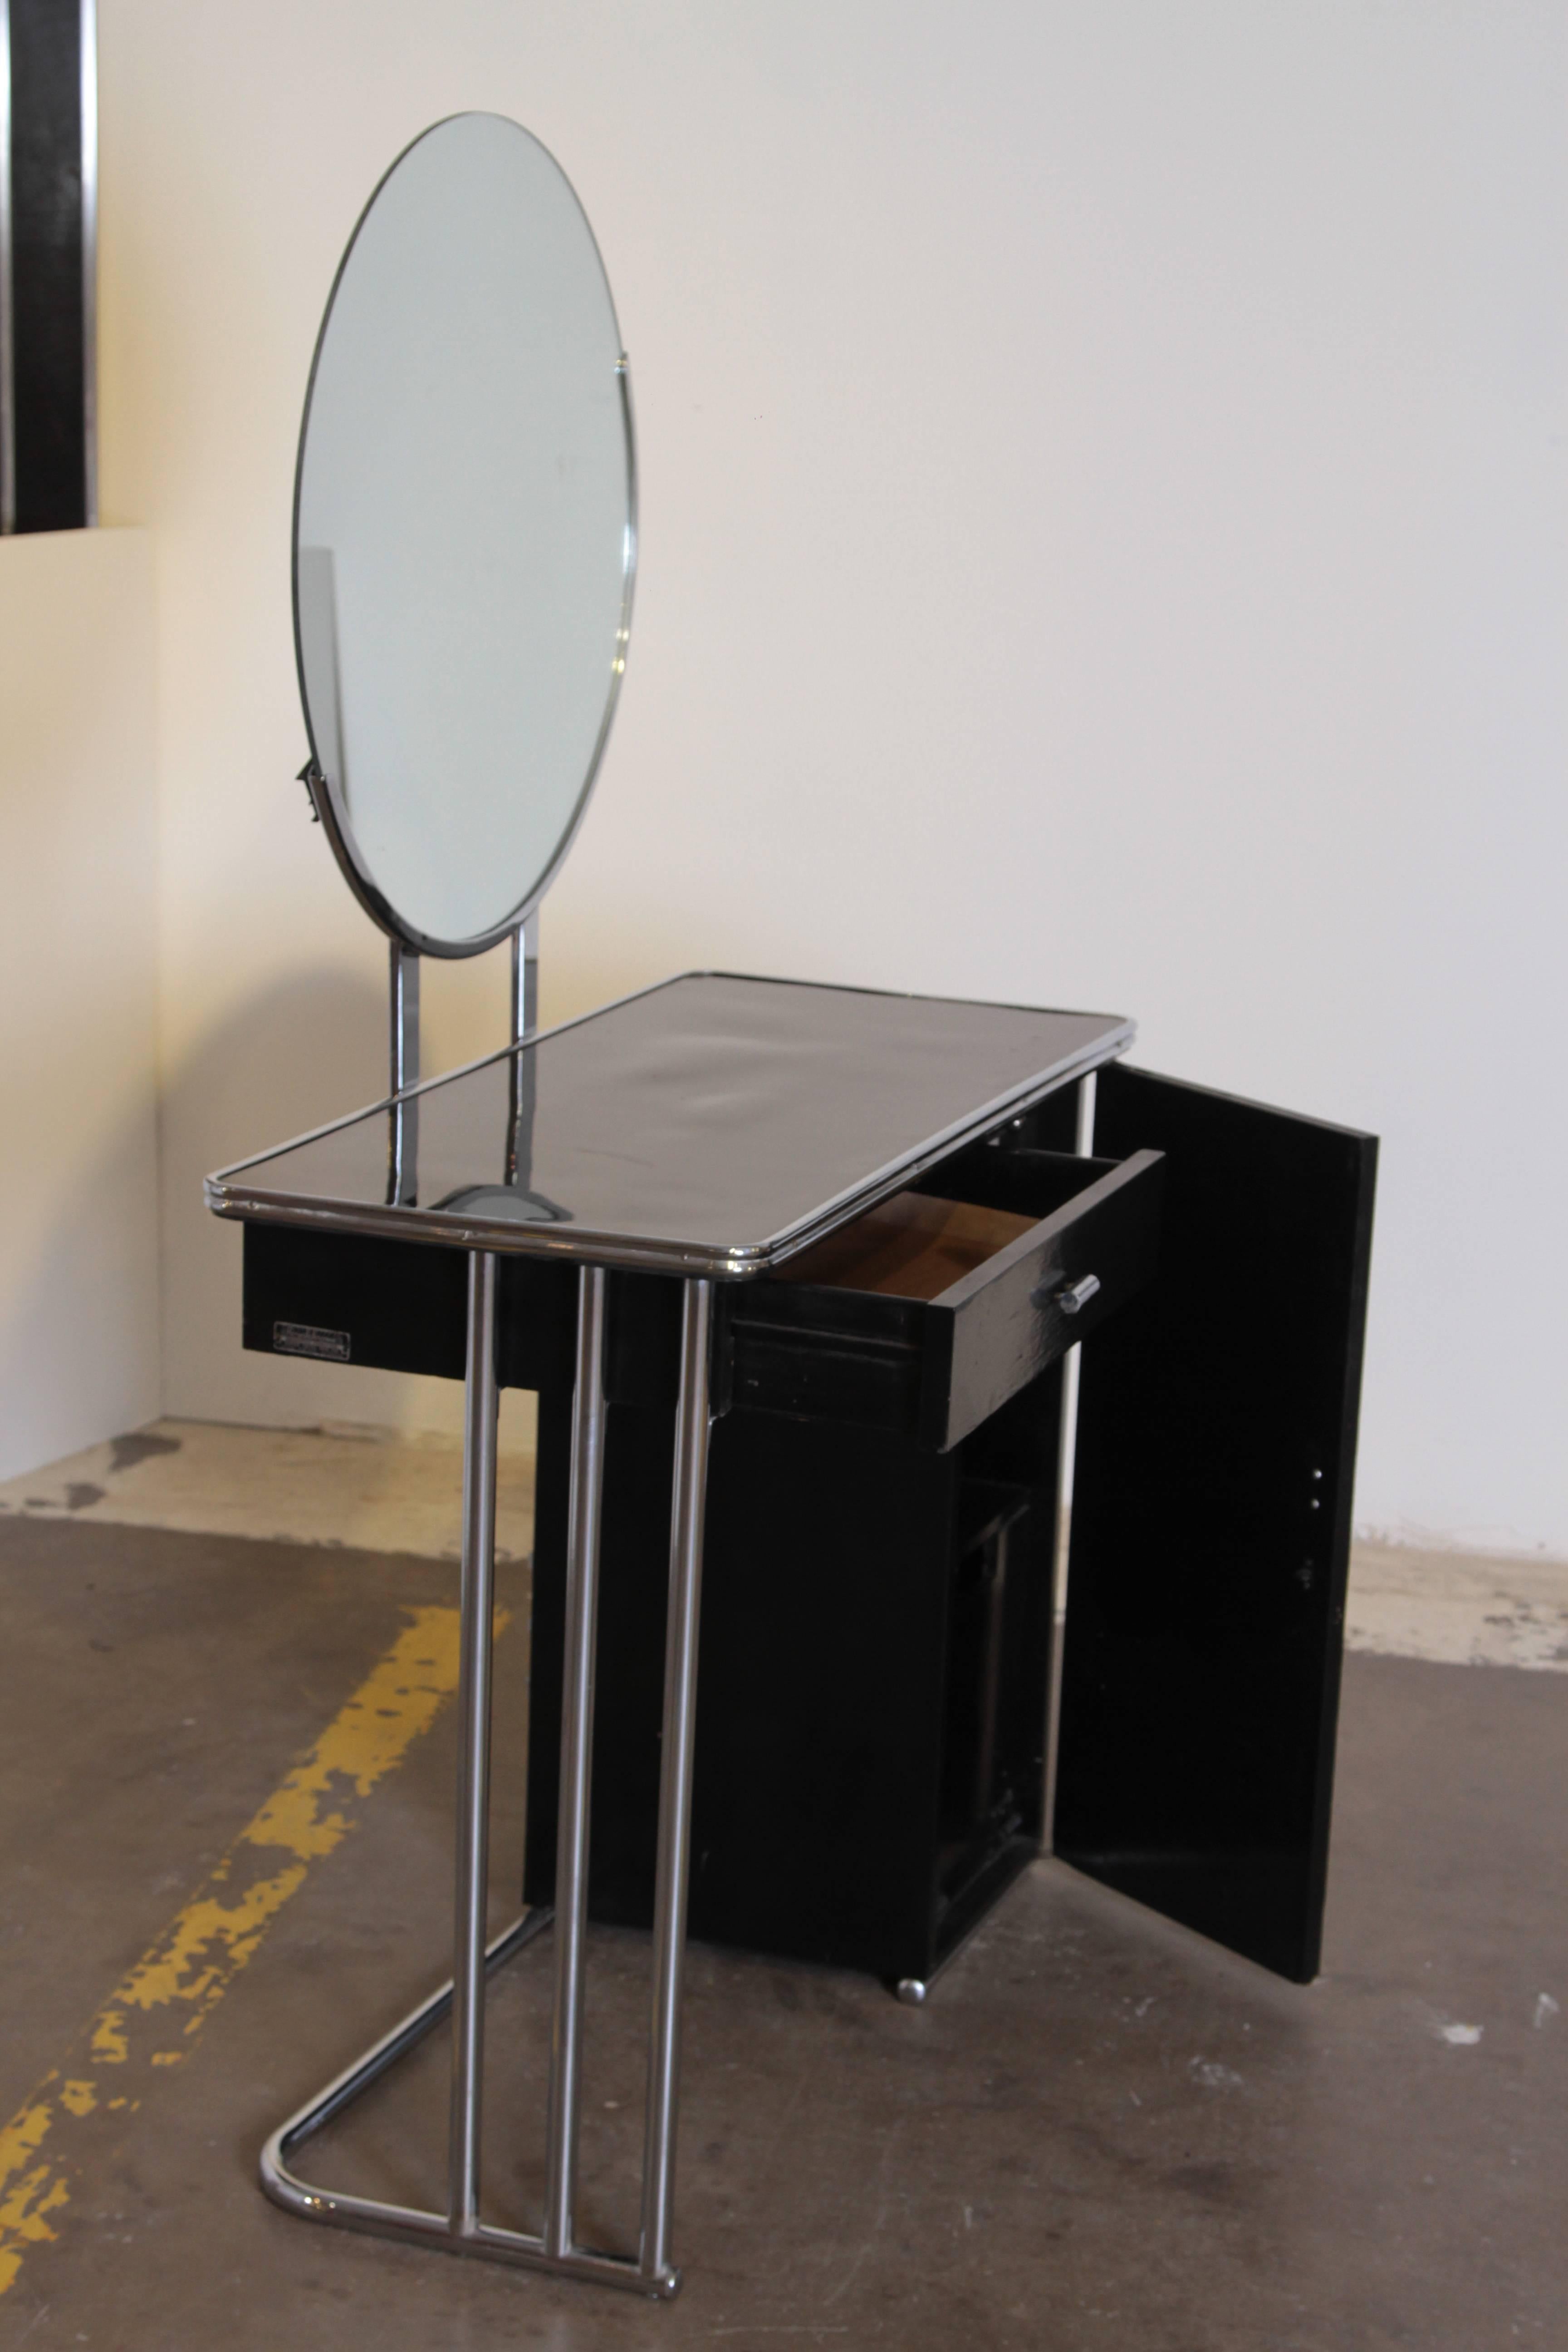 Mid-20th Century Machine Age Art Deco Royalchrome Dressing Table #347 by Royal Metal, 1936